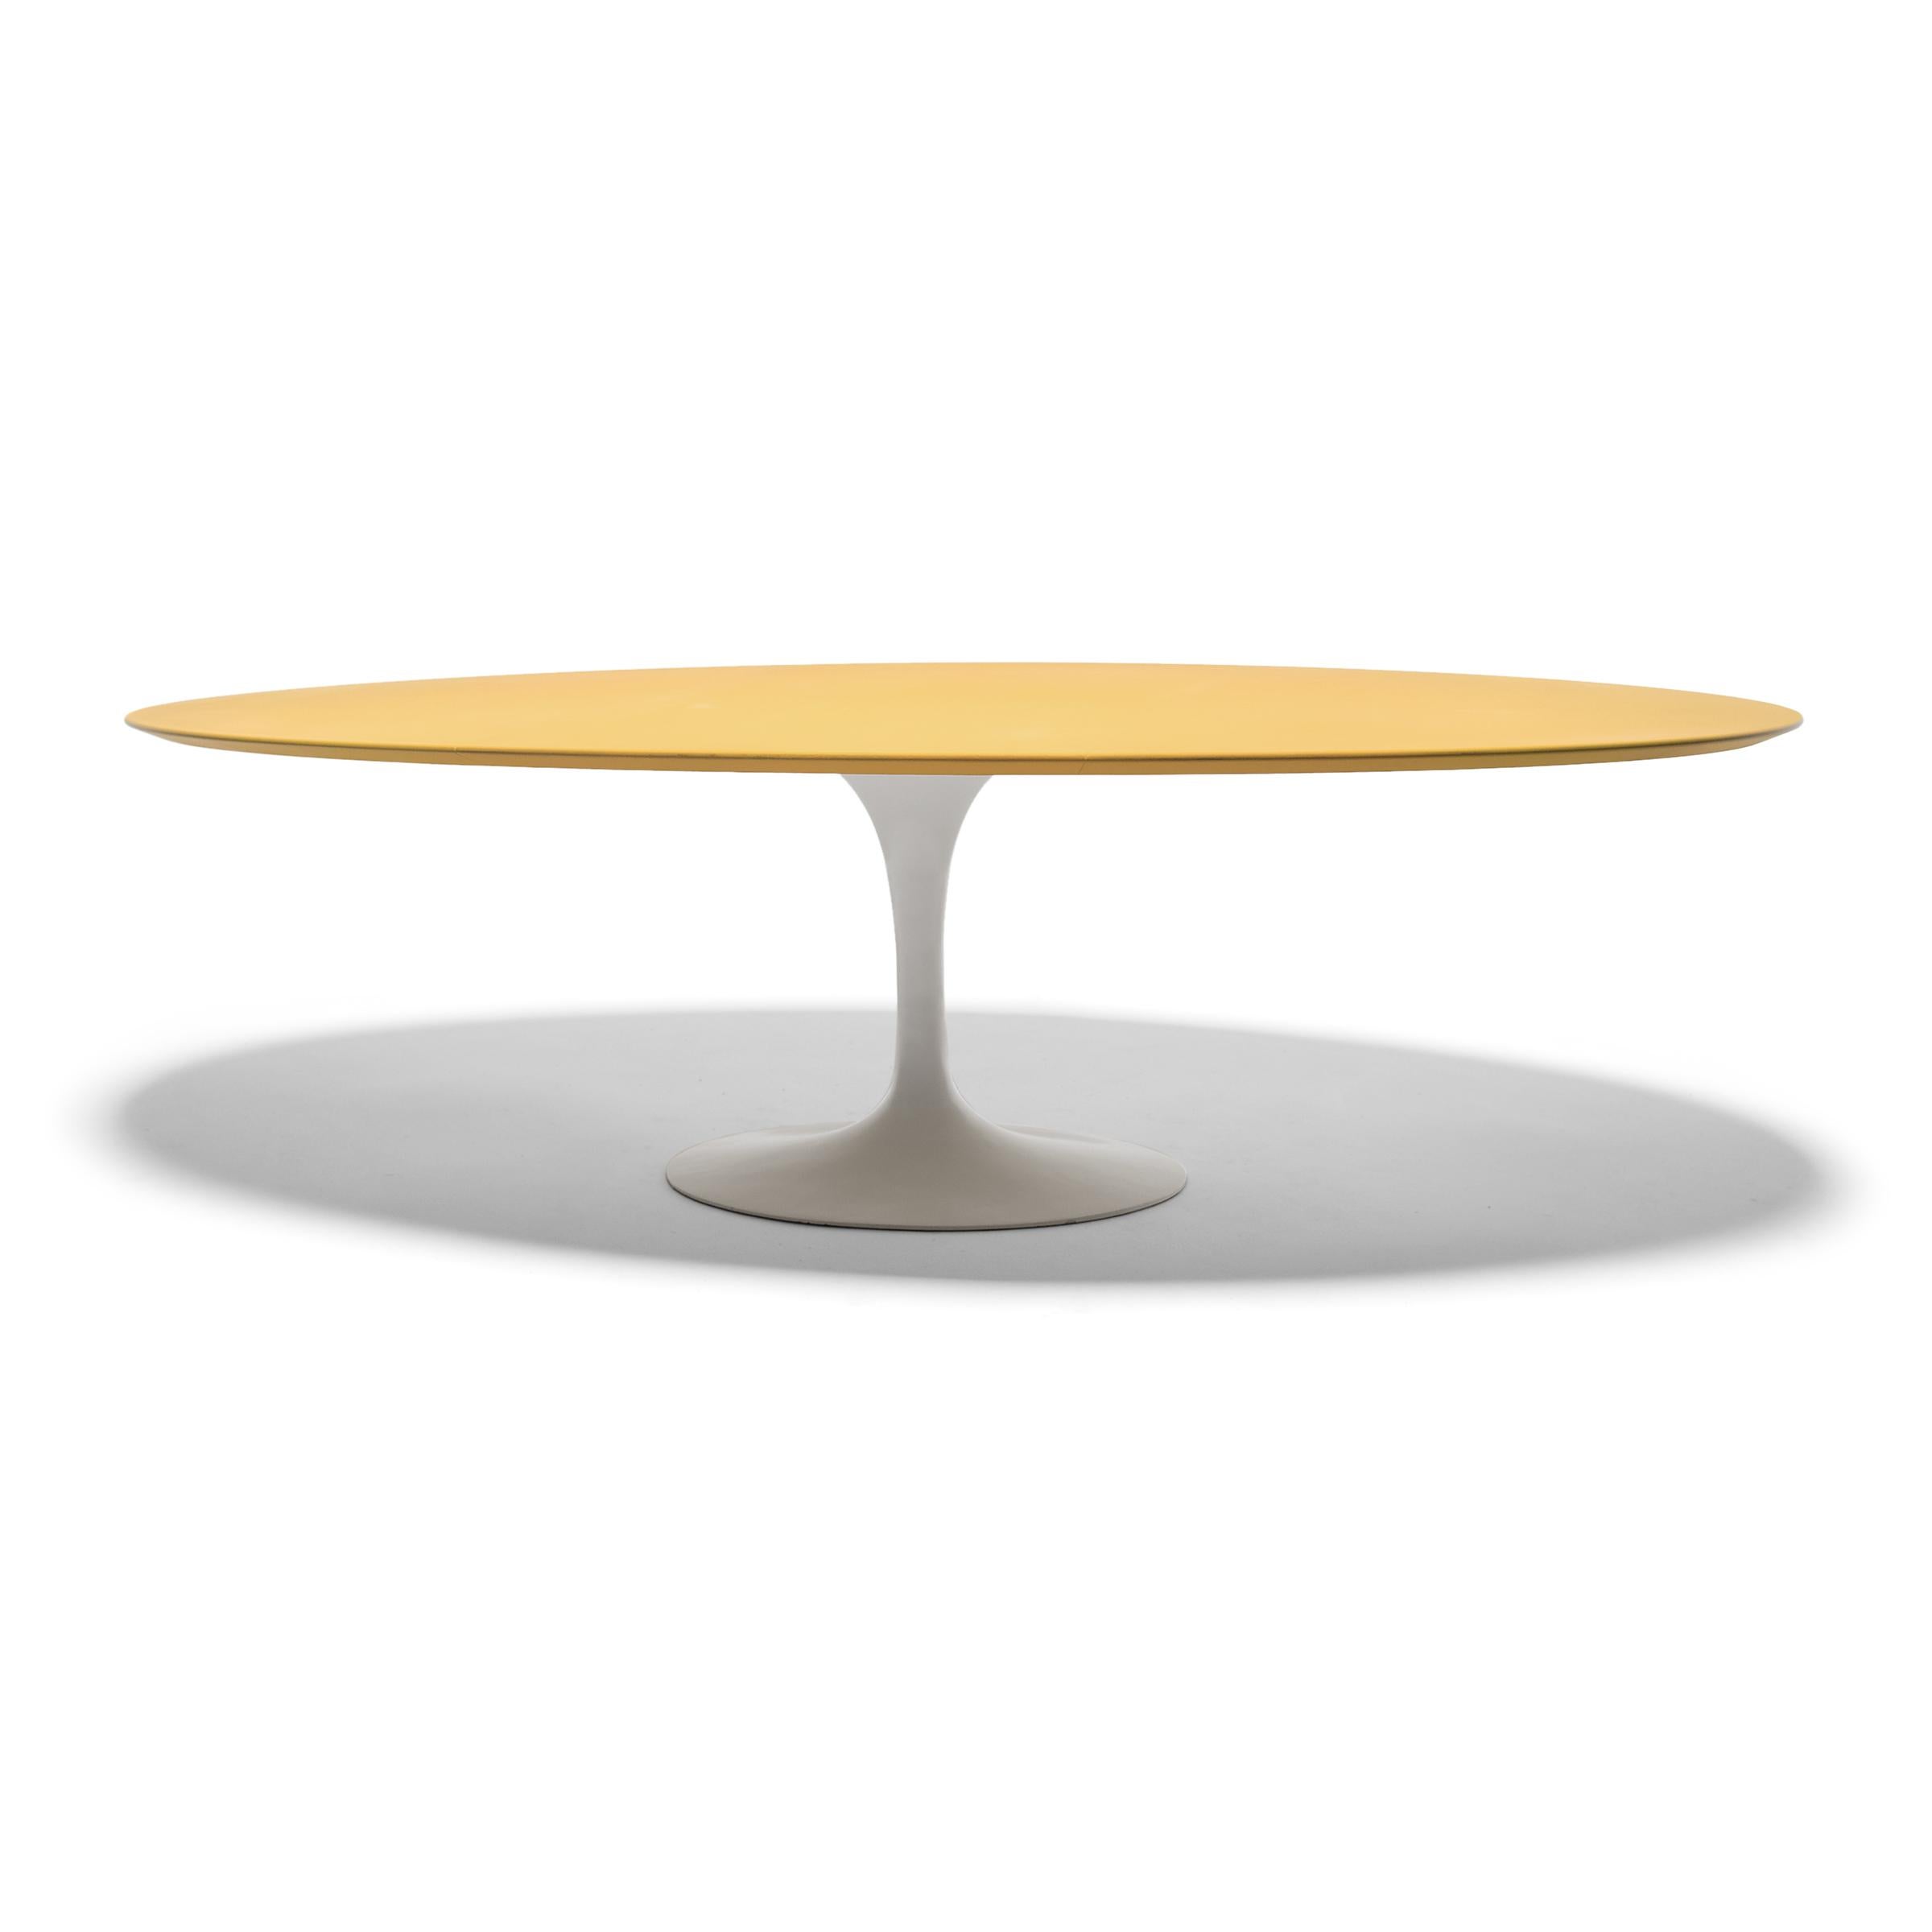 Designed in 1957 for Knoll International, the Tulip base pedestal table was Finnish designer Eero Saarinen's solution to the 